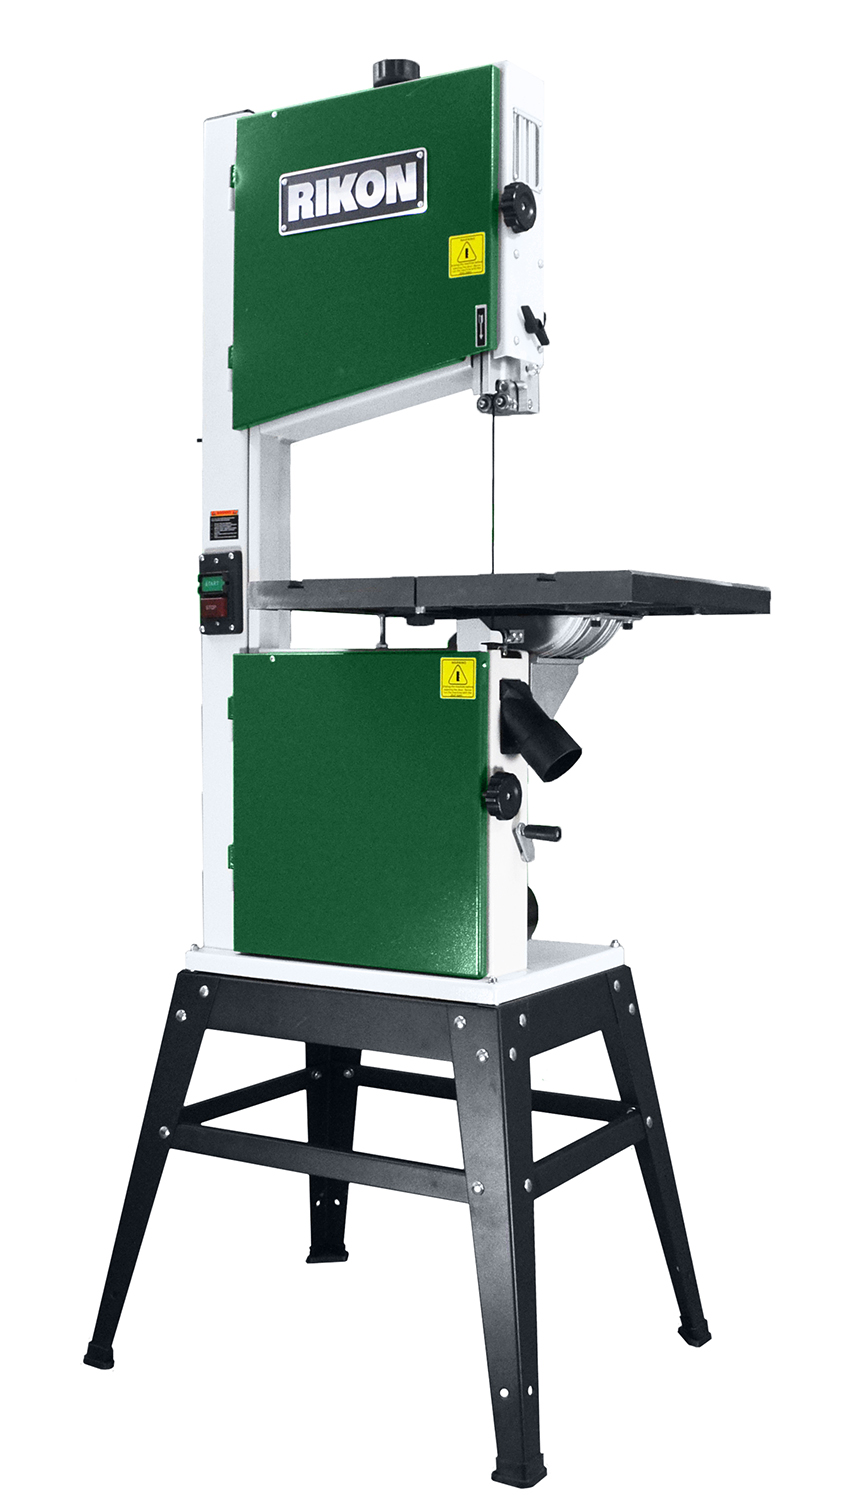 RIKON Power Tools 14" Bandsaw Open Stand